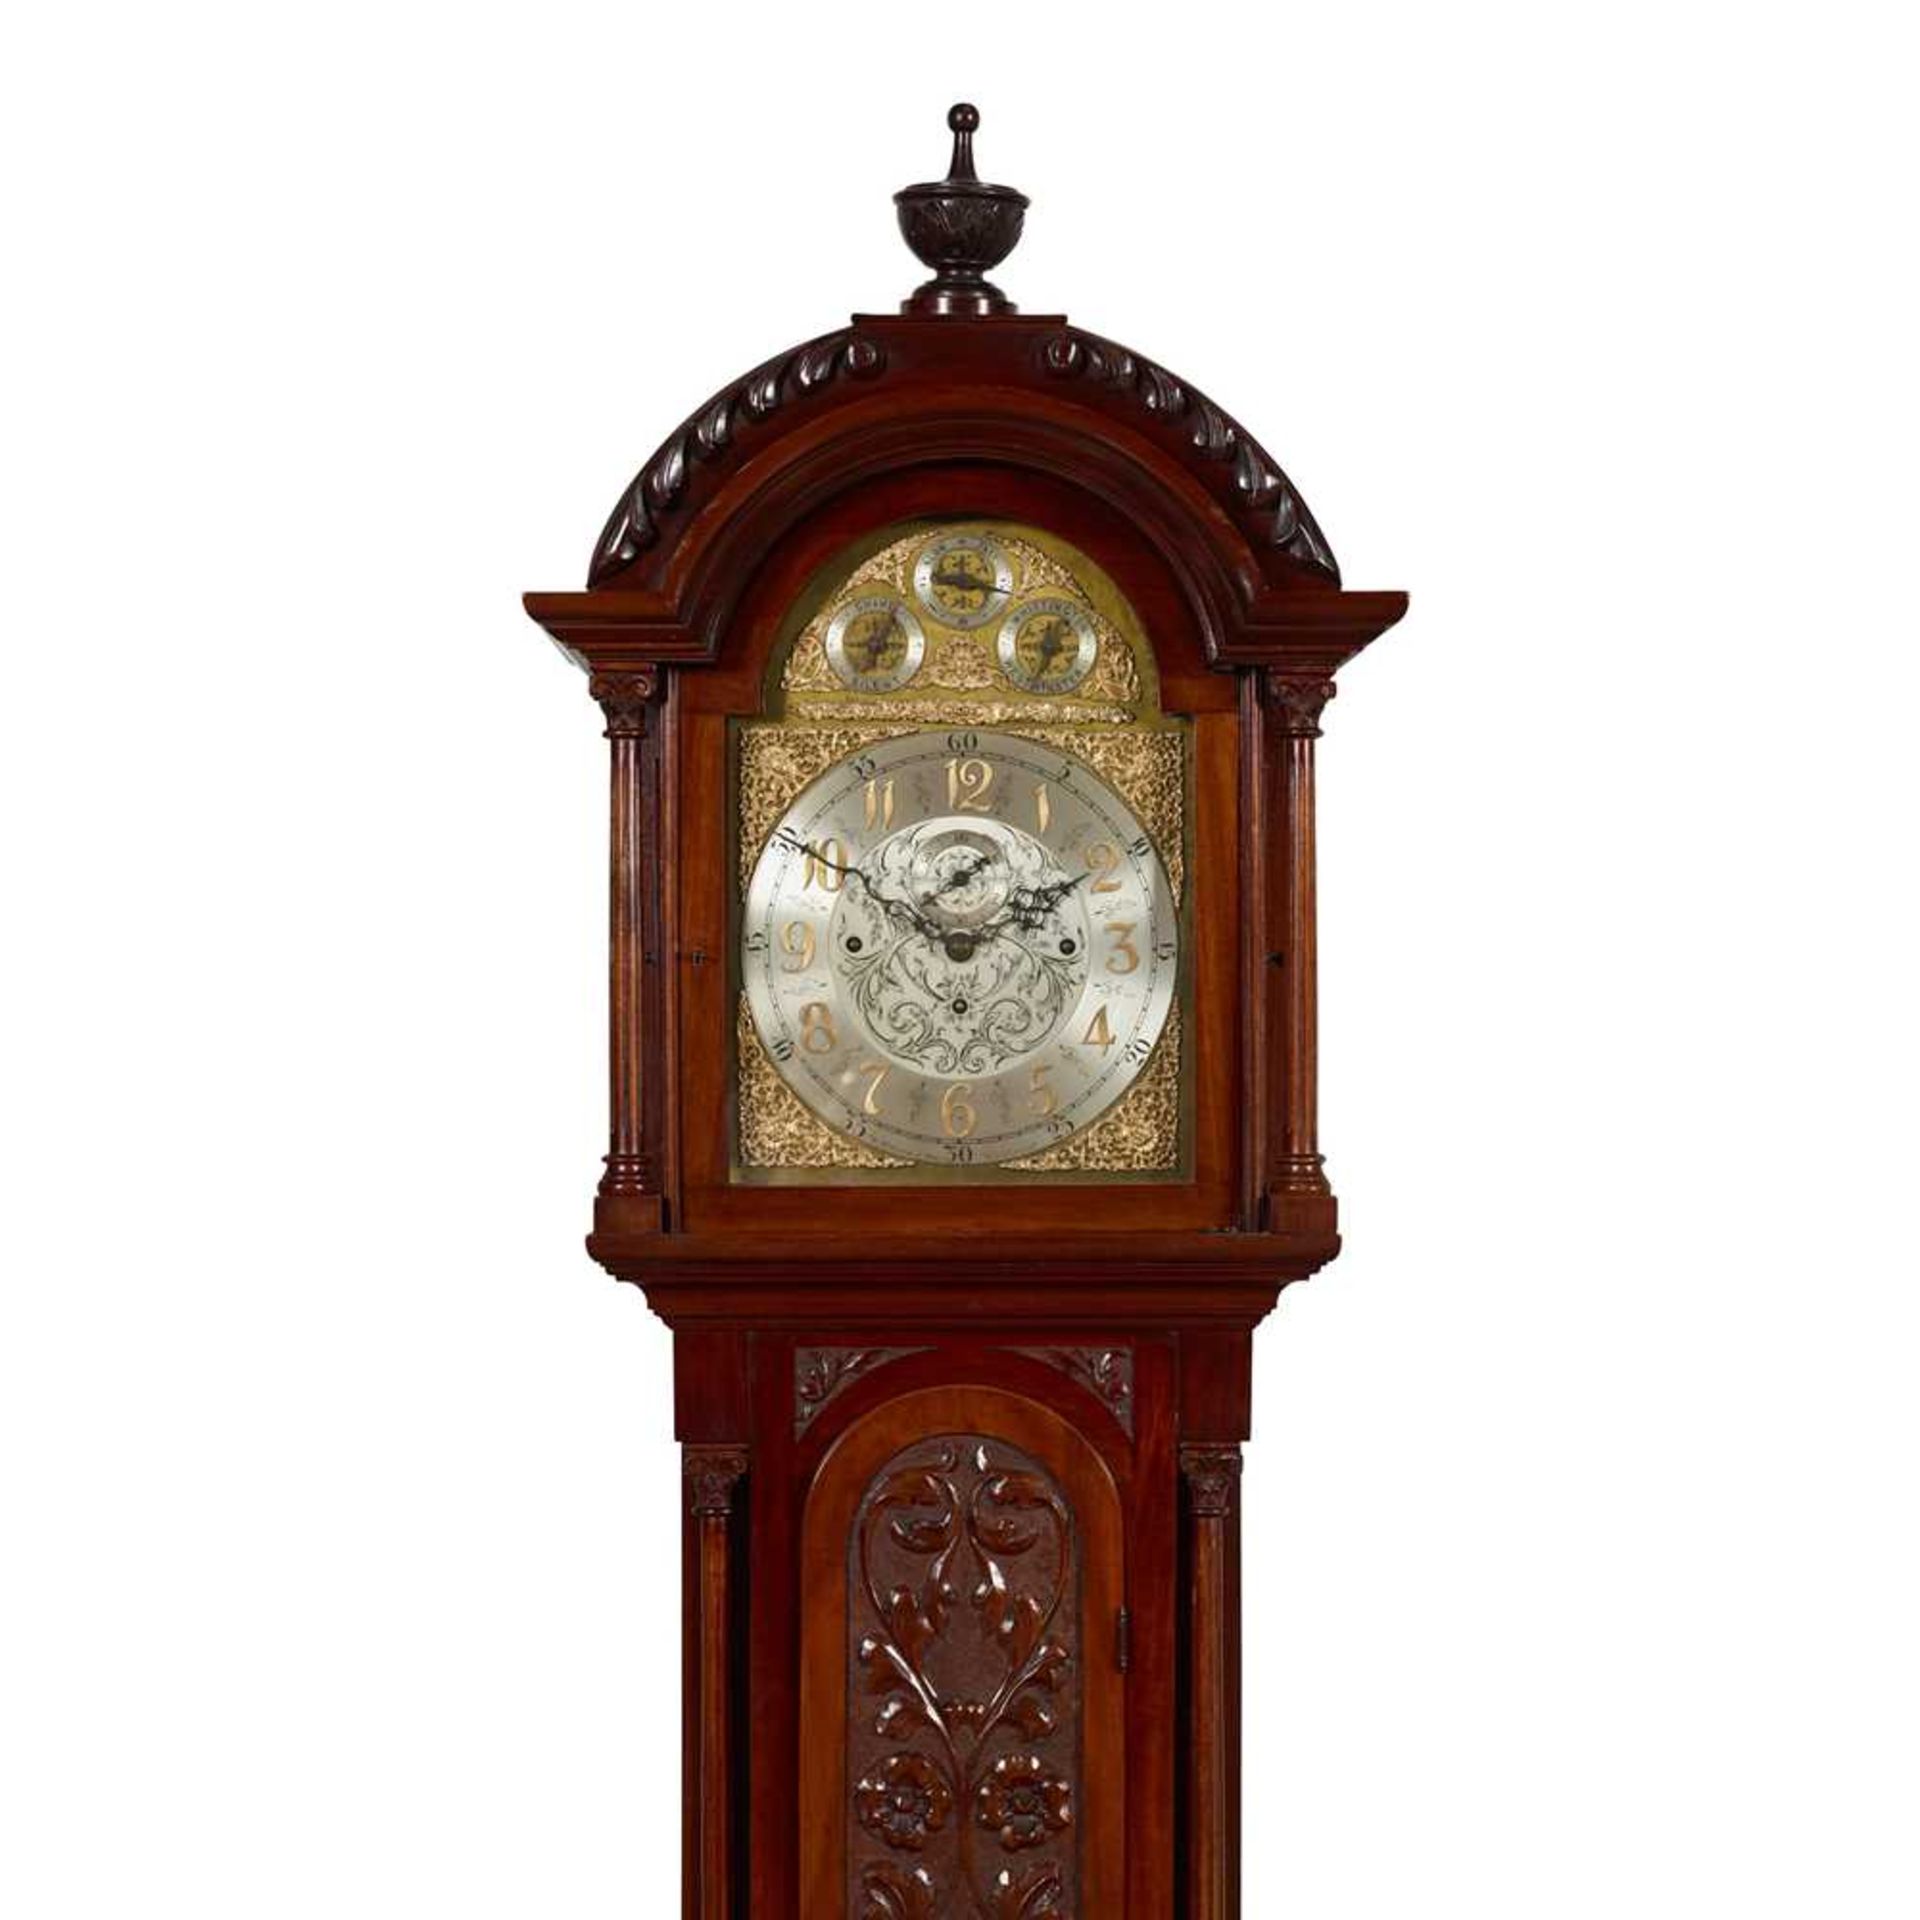 LATE VICTORIAN CHIMING LONGCASE CLOCK, W.F. EVANS & SONS, HANDSWORTH LATE 19TH CENTURY - Image 2 of 3